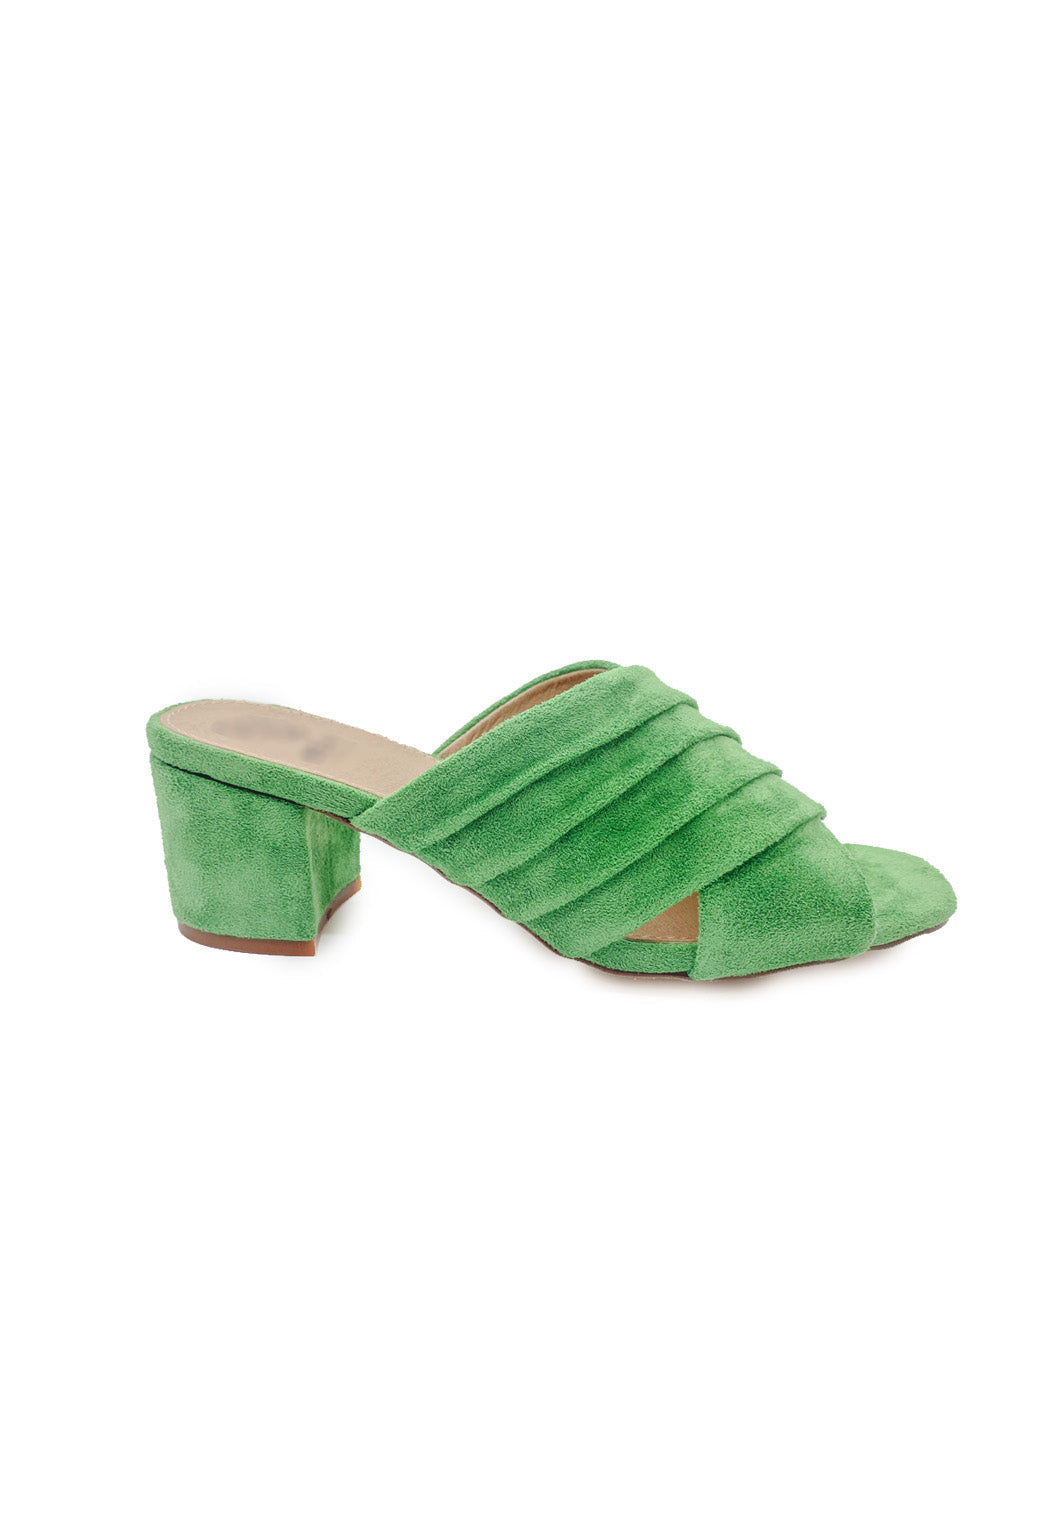 Pleated Crossover Sandals - Green - Final Sale